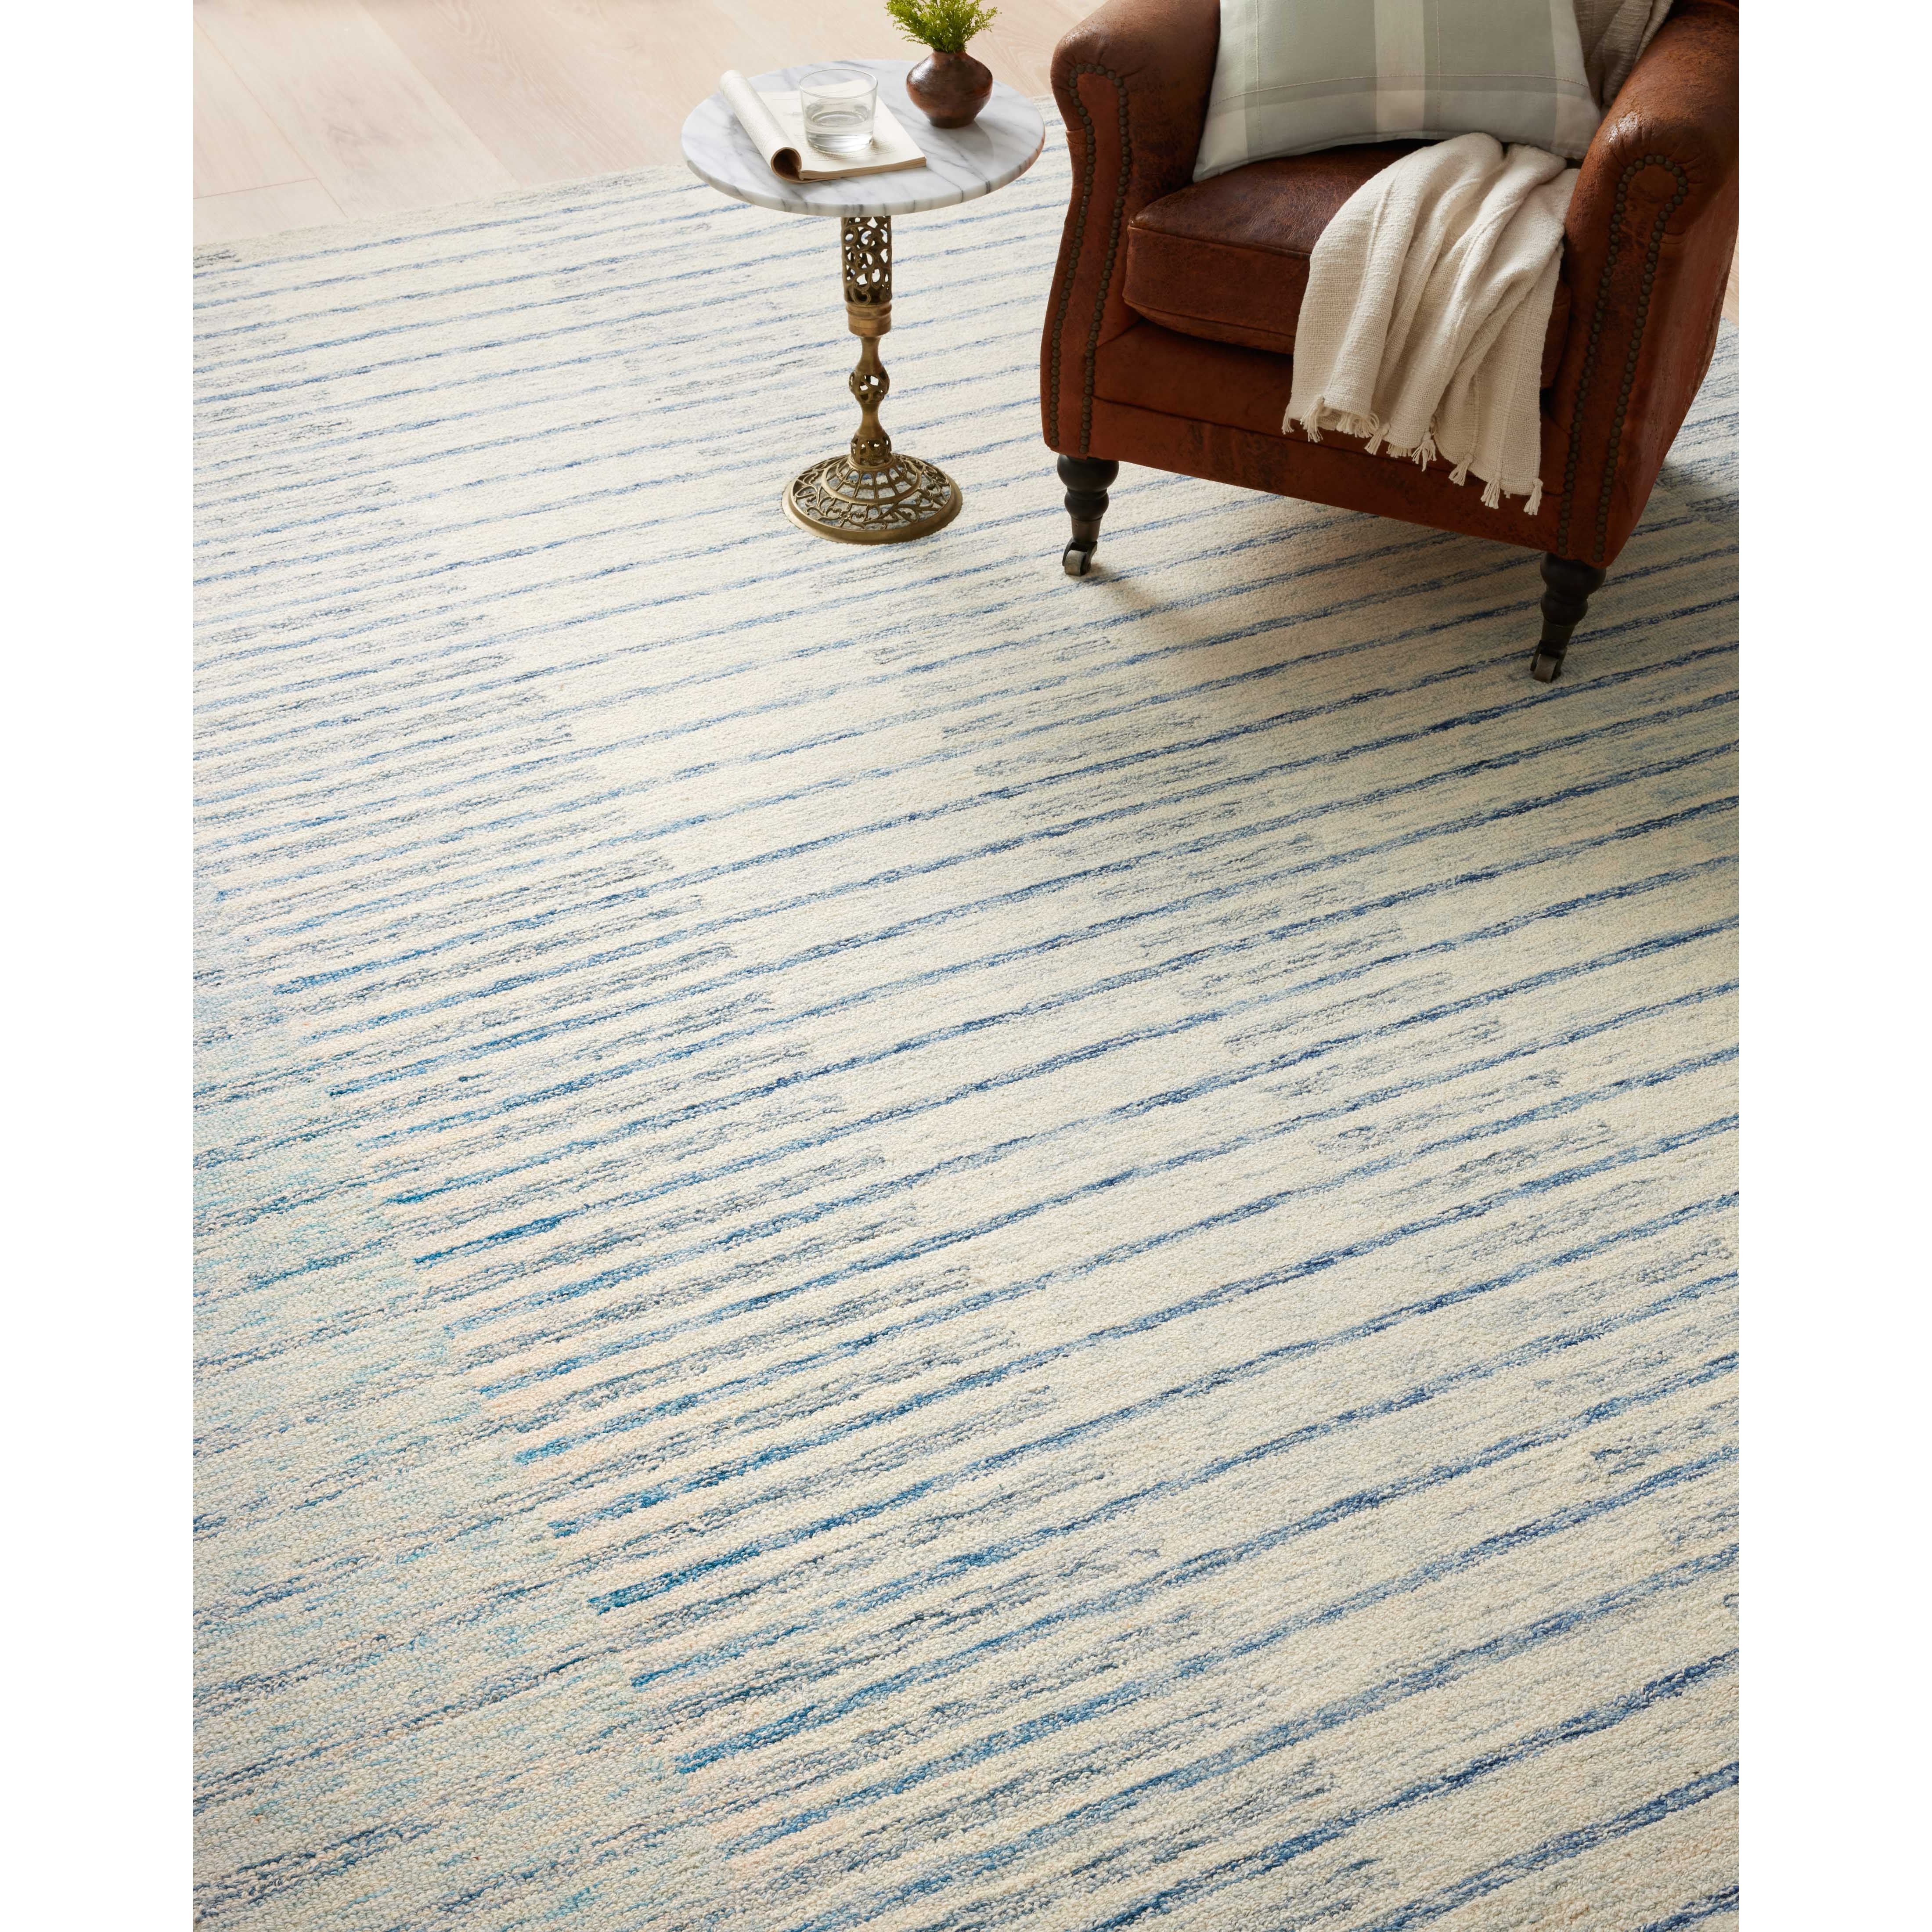 Blues skies ahead. We love this Chris Ivory / Denim rug for a coastal vibe where the only cares in the world are a day on the water. Amethyst Home provides interior design services, furniture, rugs, and lighting in the Seattle metro area.